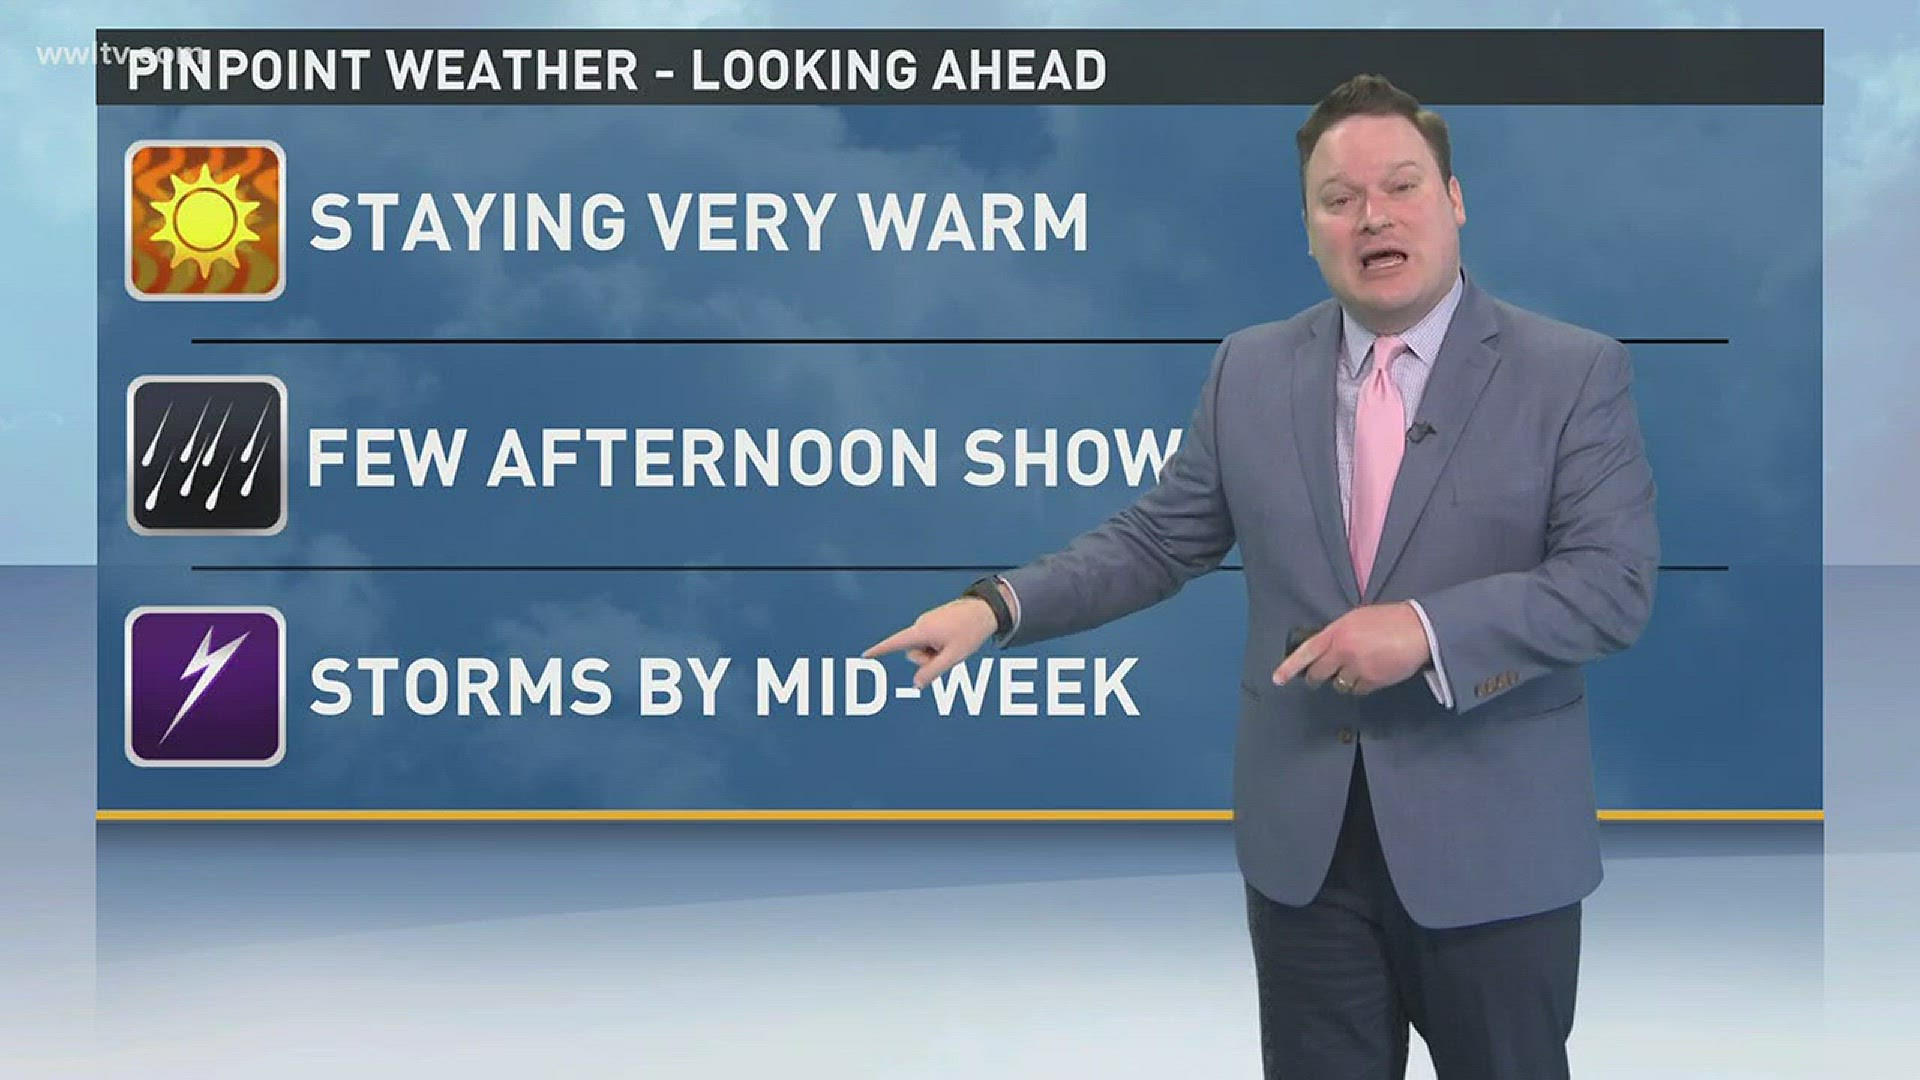 Meteorologist Chris Franklin looks ahead to the warm week and storm chances by Wednesday.